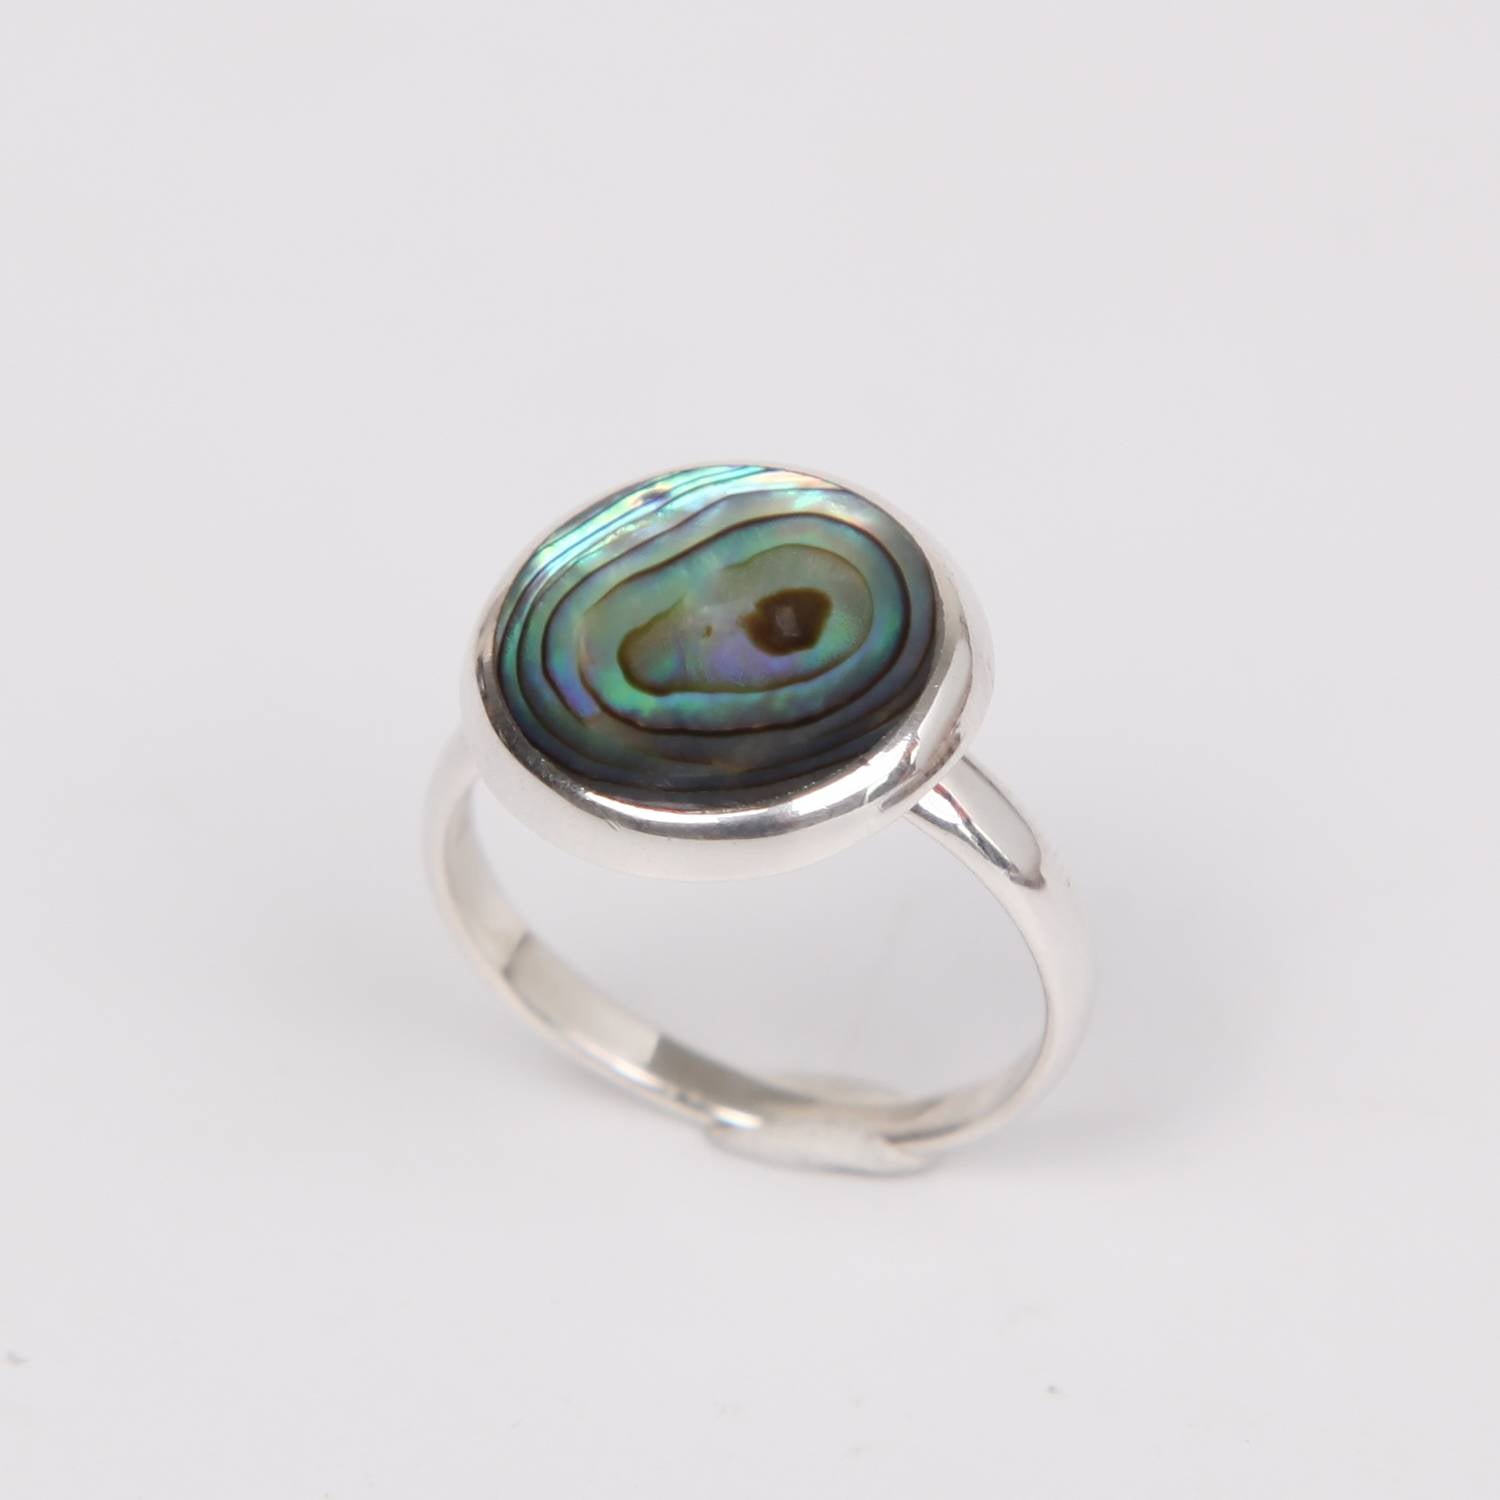 Oval Sterling Silver Ring with Paua Shell( Rainbow Abalone)